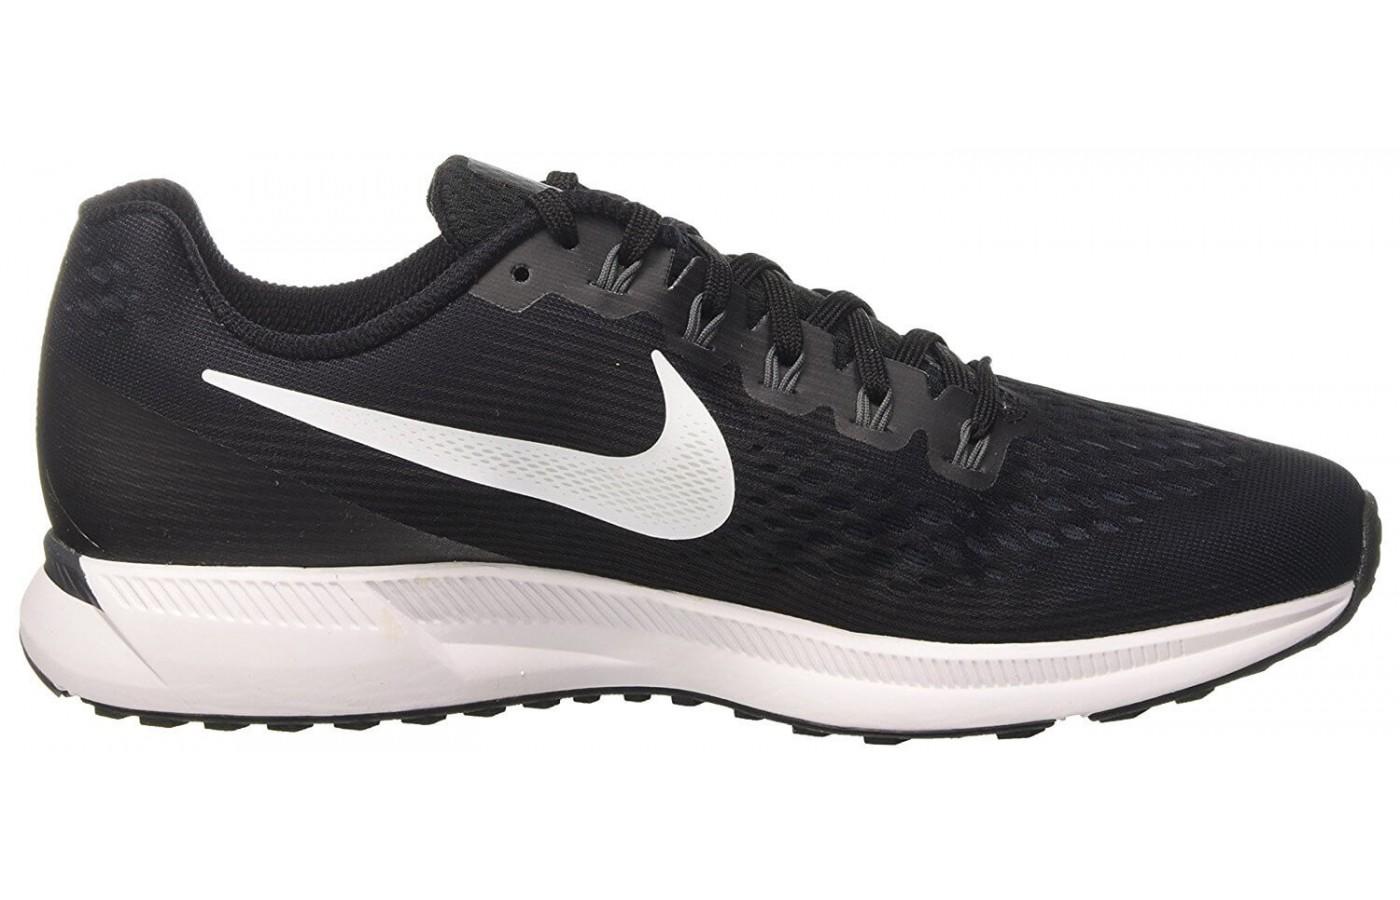 the Nike Air Zoom Pegasus 34 is stylish, affordable, and reasonably priced